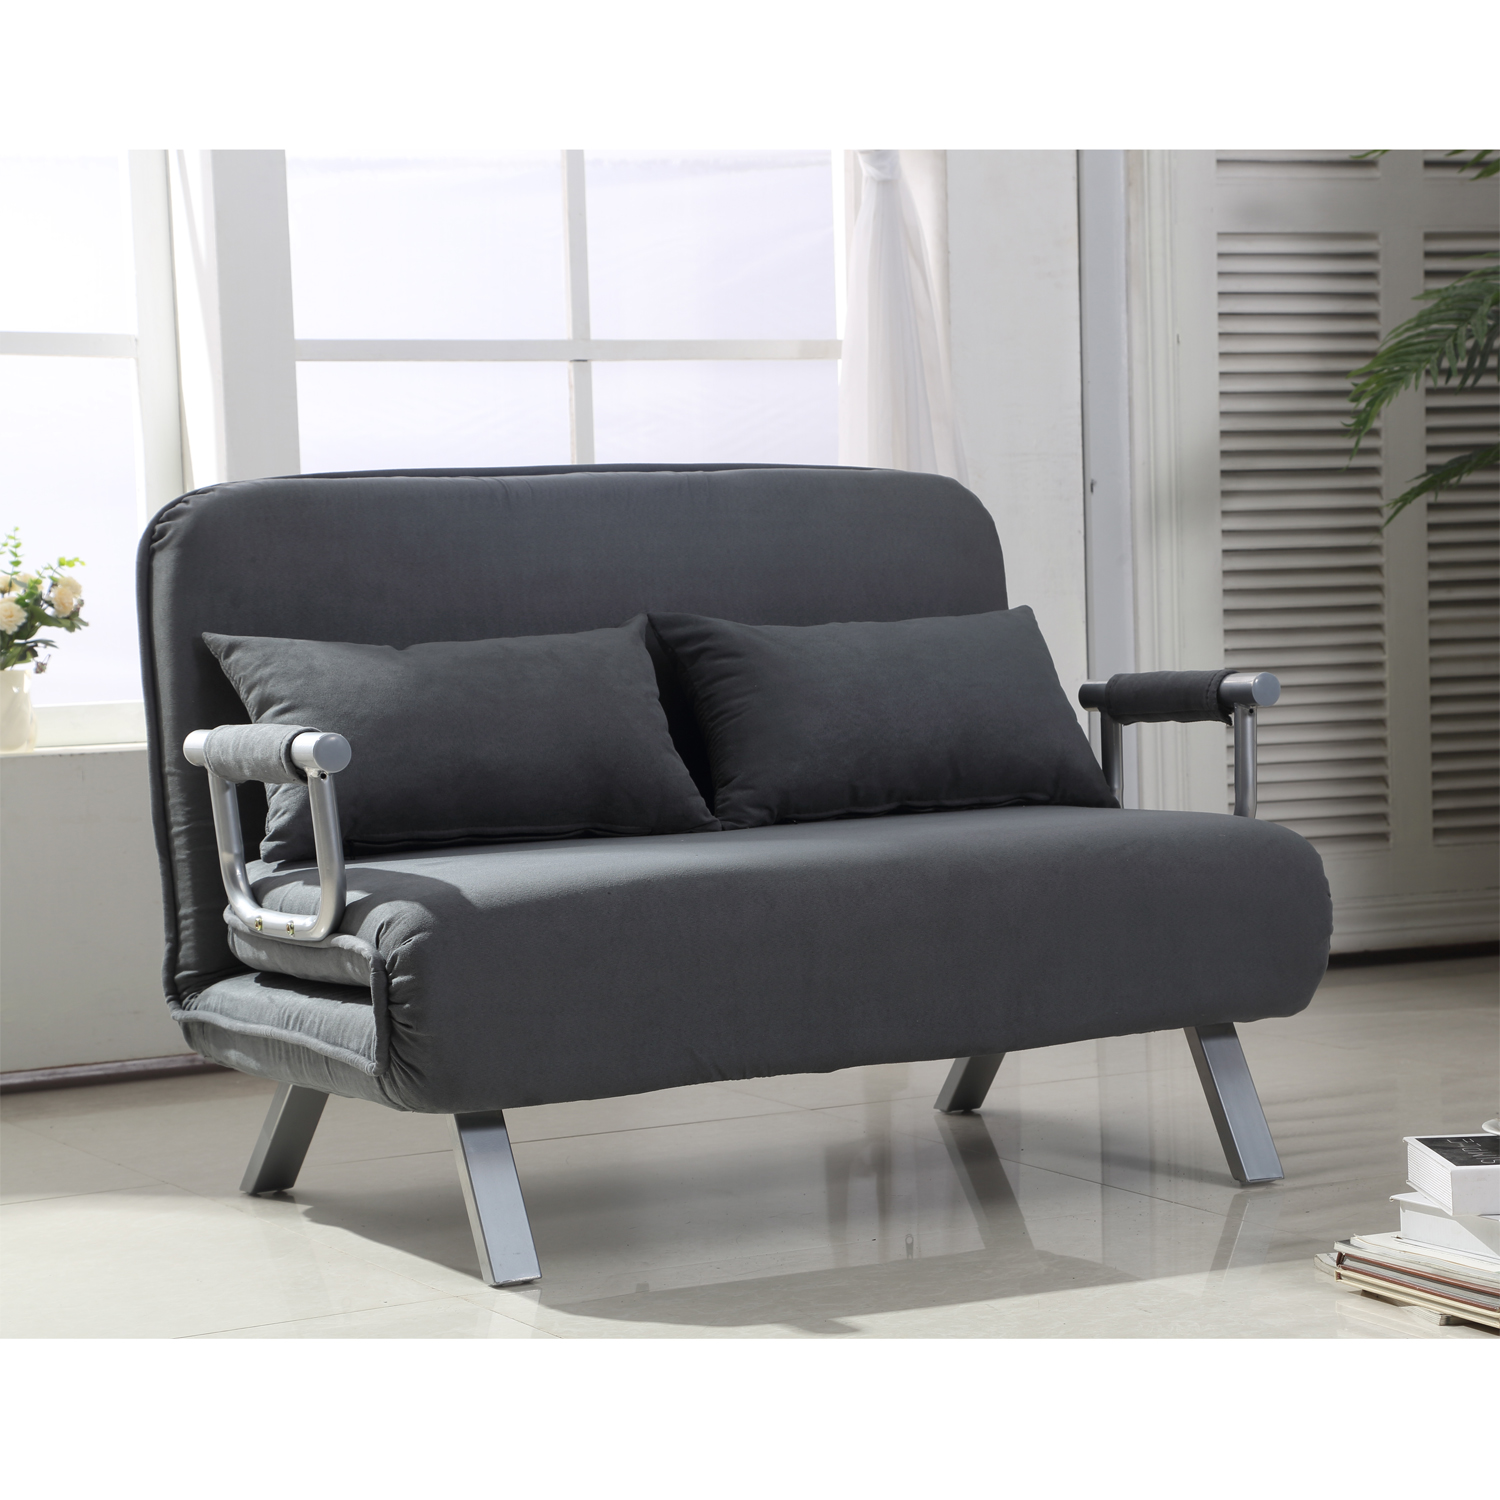 HomCom Small Sofa Couch Futon with Fold Up Bed and Adjustable Backrest, featuring Modern Design with Chic Suede, Grey - image 2 of 10